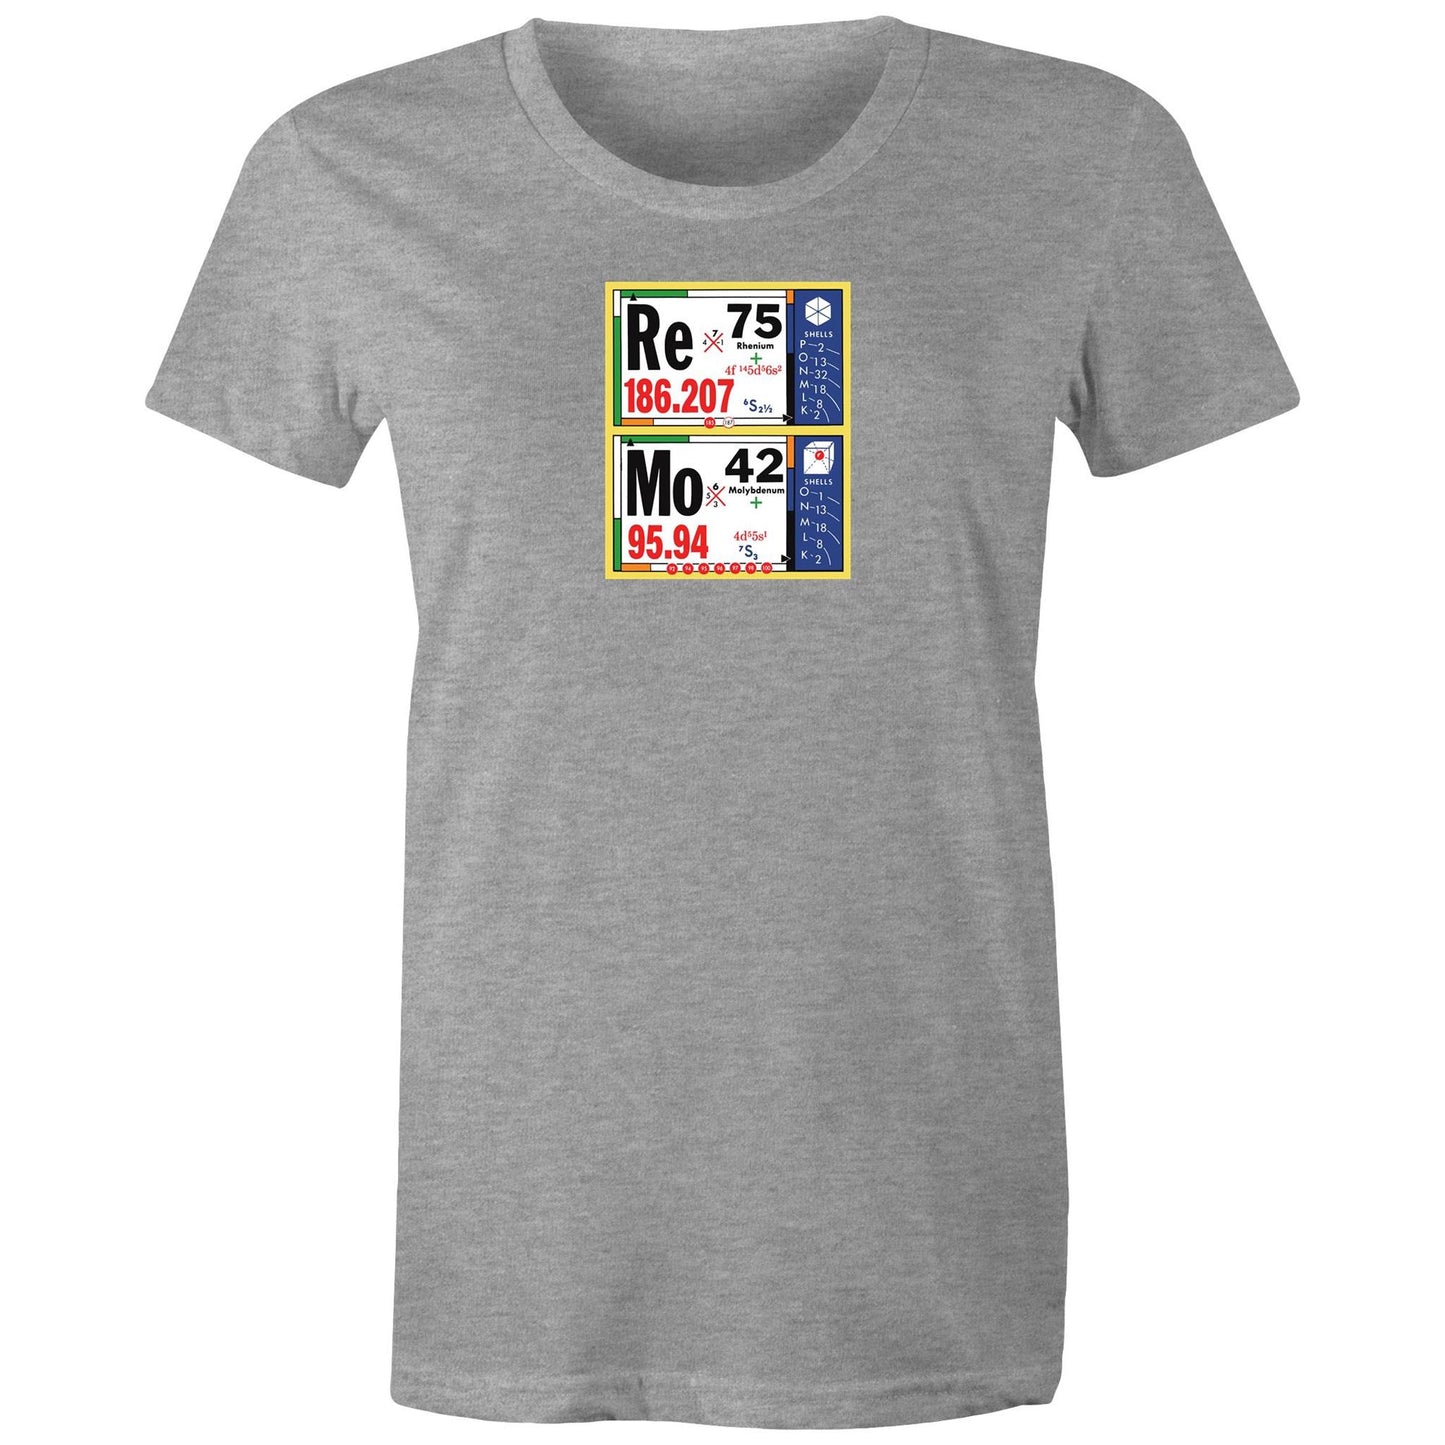 Periodic Re Mo T Shirts for Women